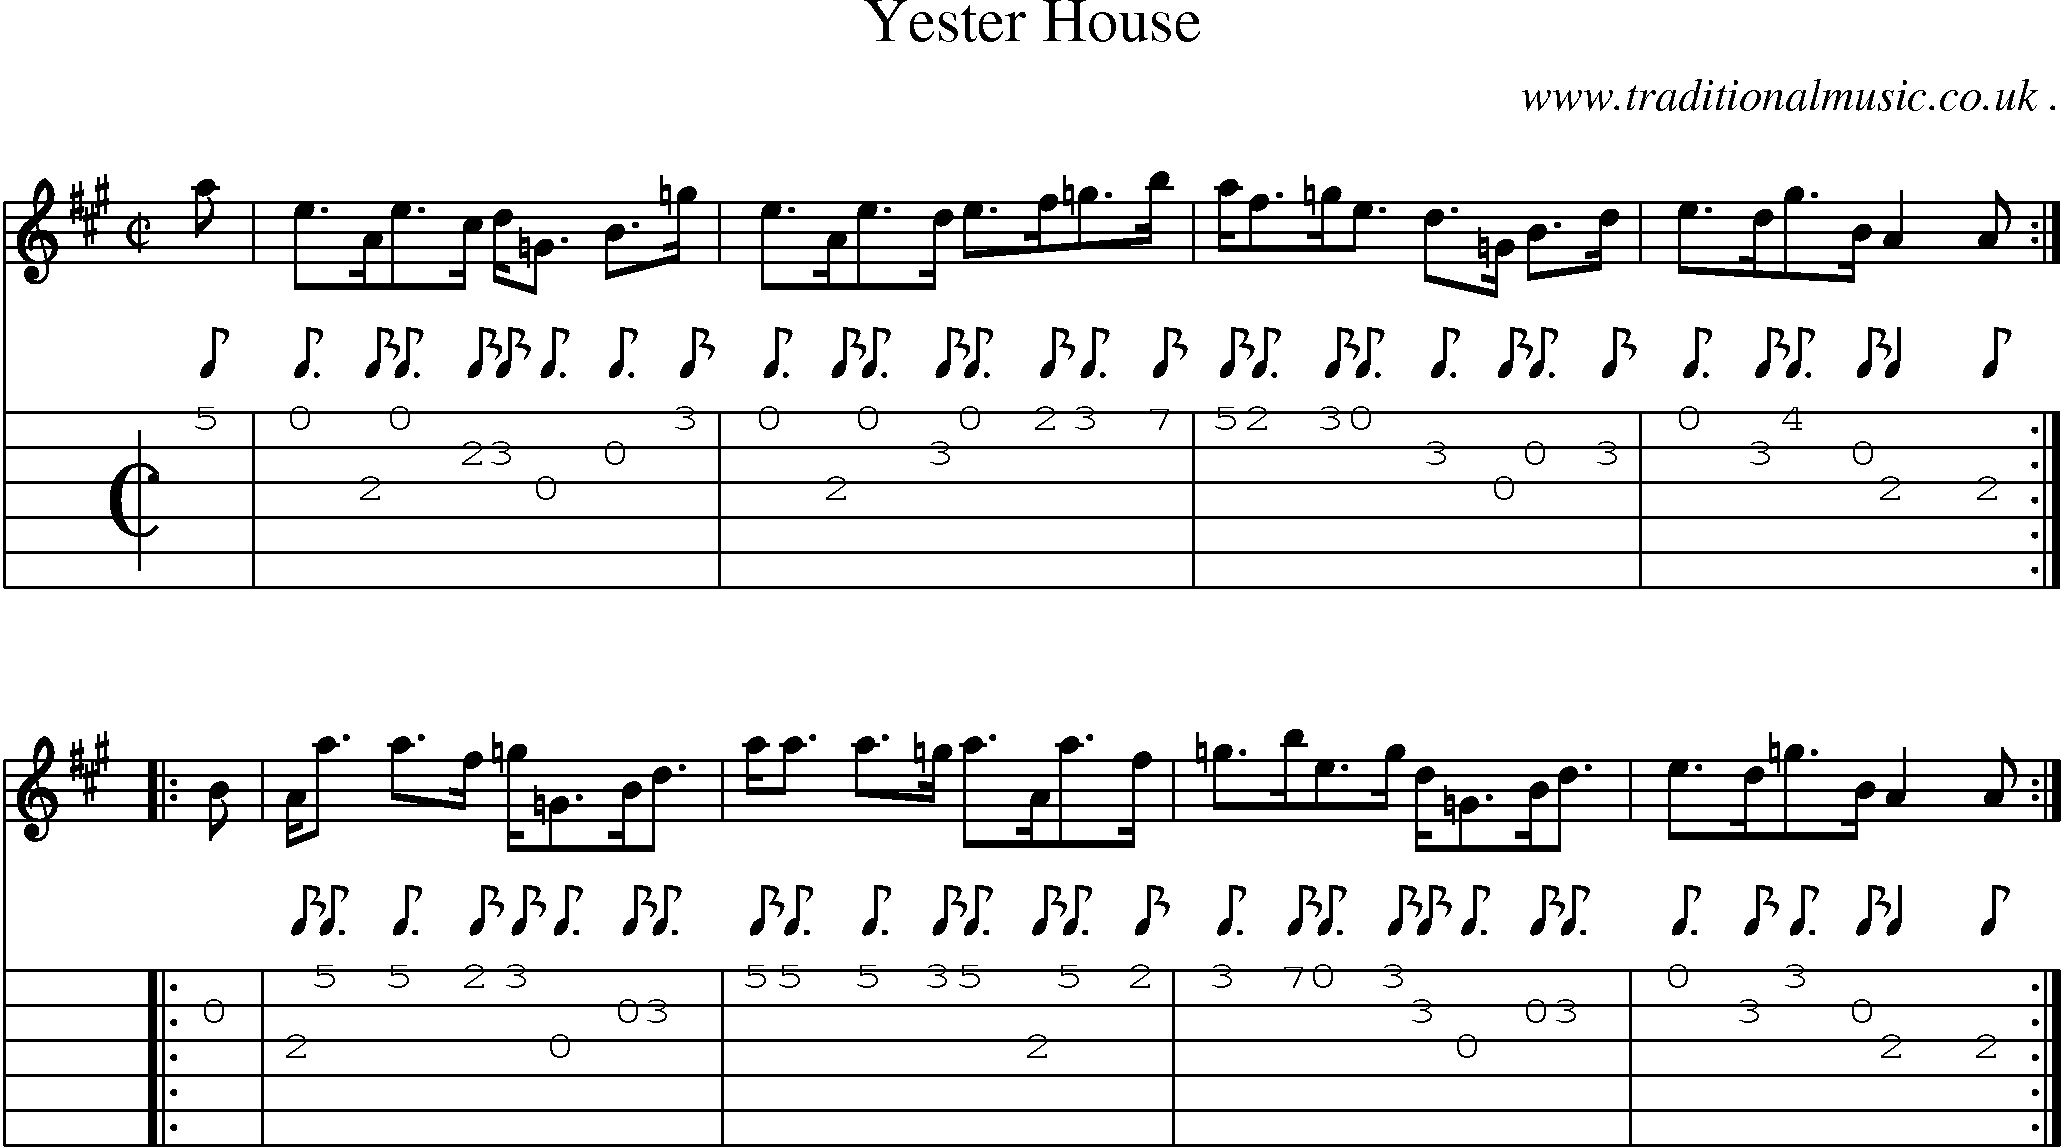 Sheet-music  score, Chords and Guitar Tabs for Yester House